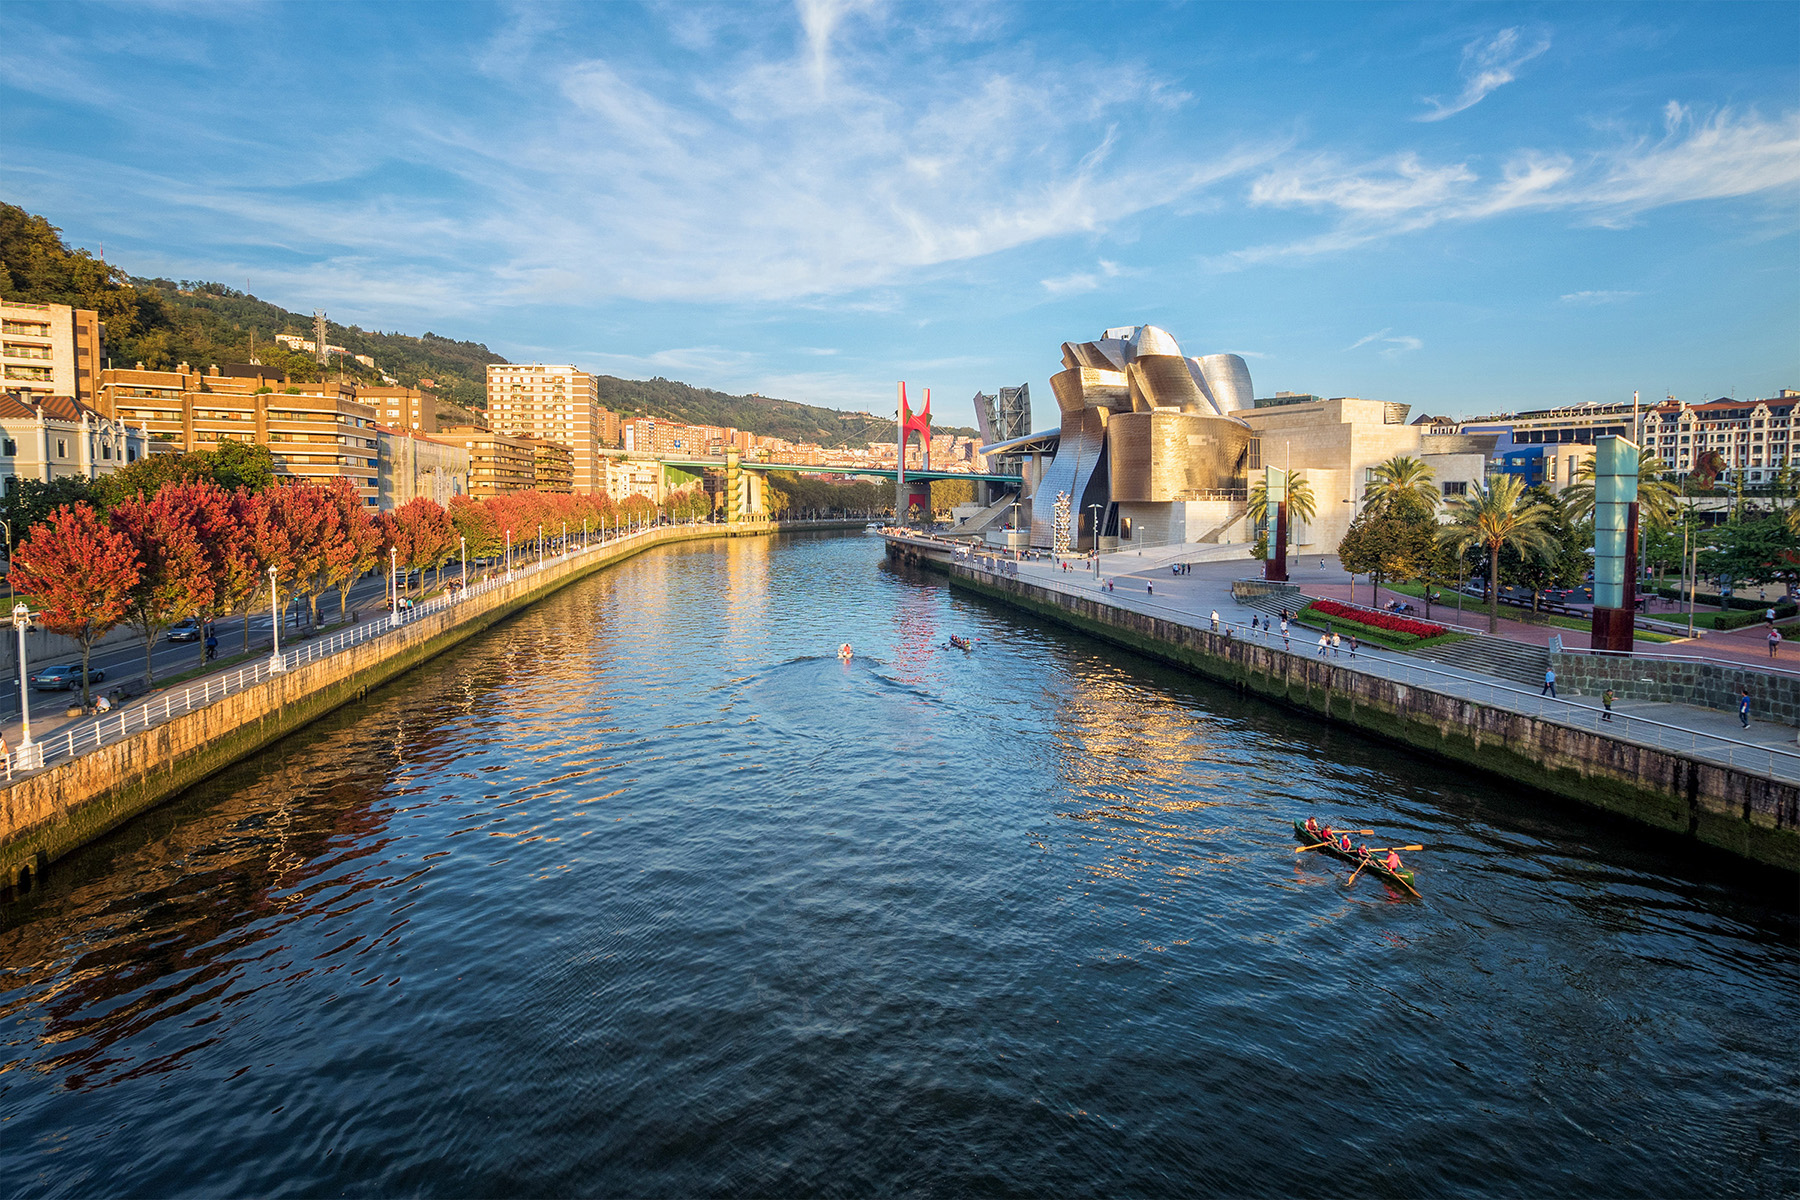 2. <strong>Bilbao, Spain</strong><br><strong>The skinny:</strong> 402% increase; won European City of the Year in 2018, one of 12 host cities for 2020 European Cup<br><strong>Choicest digs:</strong> <a href="https://www.airbnb.com/rooms/24940339?source_impression_id=p3_1572462820_XRel2CgwEy8ru485">River View Studio</a>